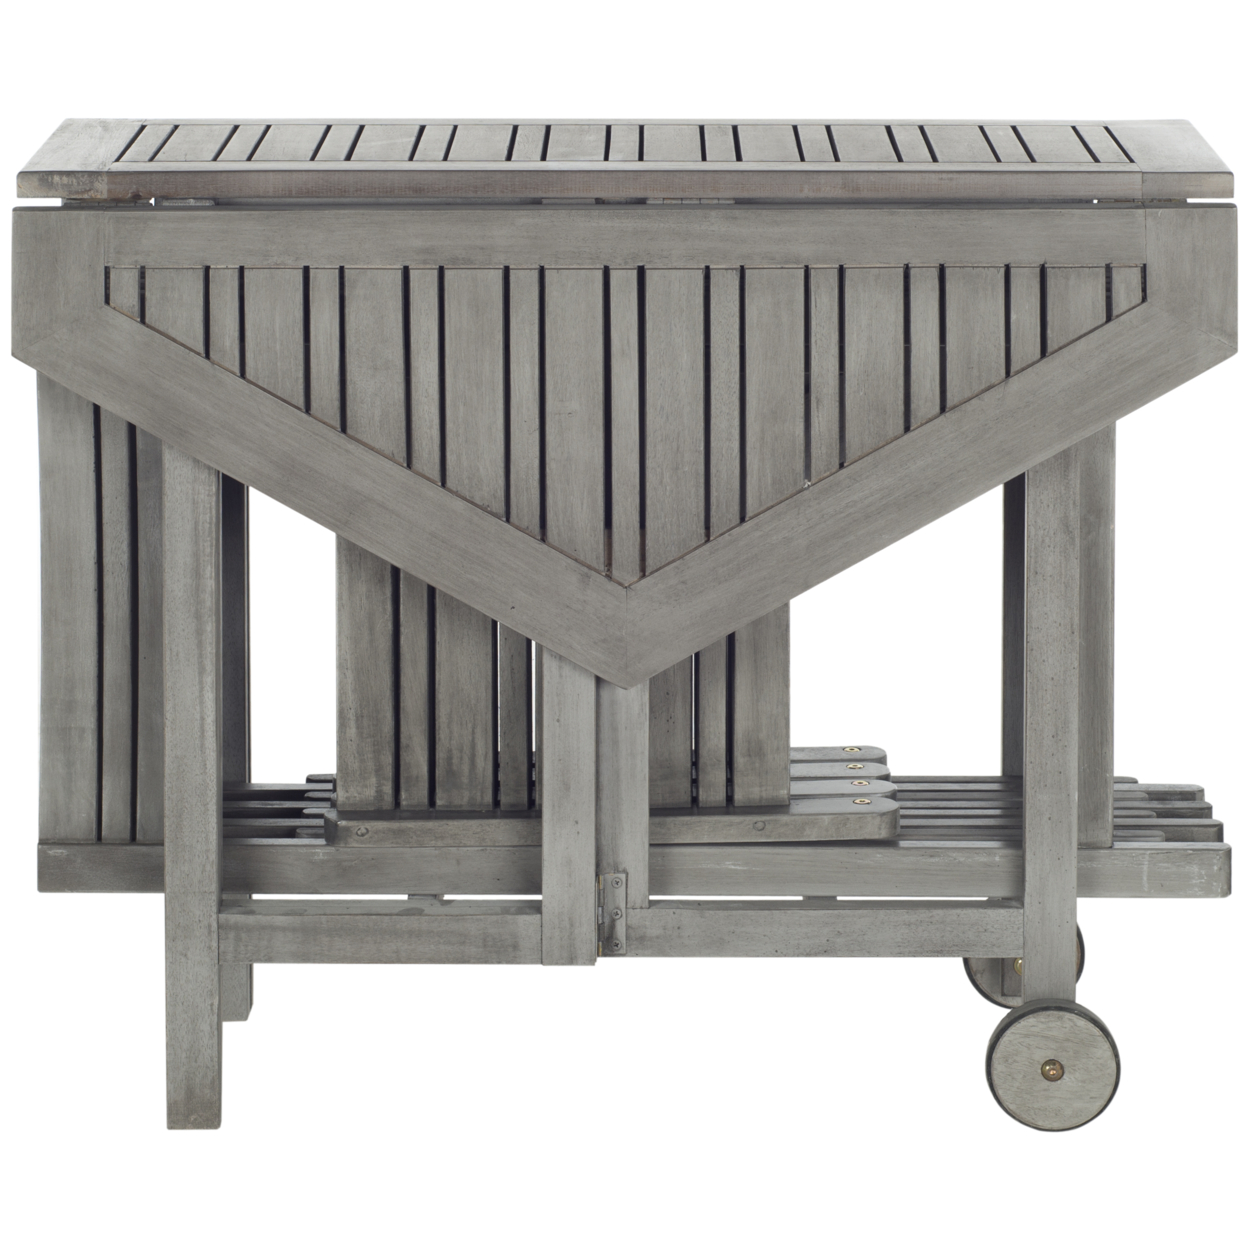 SAFAVIEH Outdoor Collection Kerman Table & 4 Chairs Grey Wash